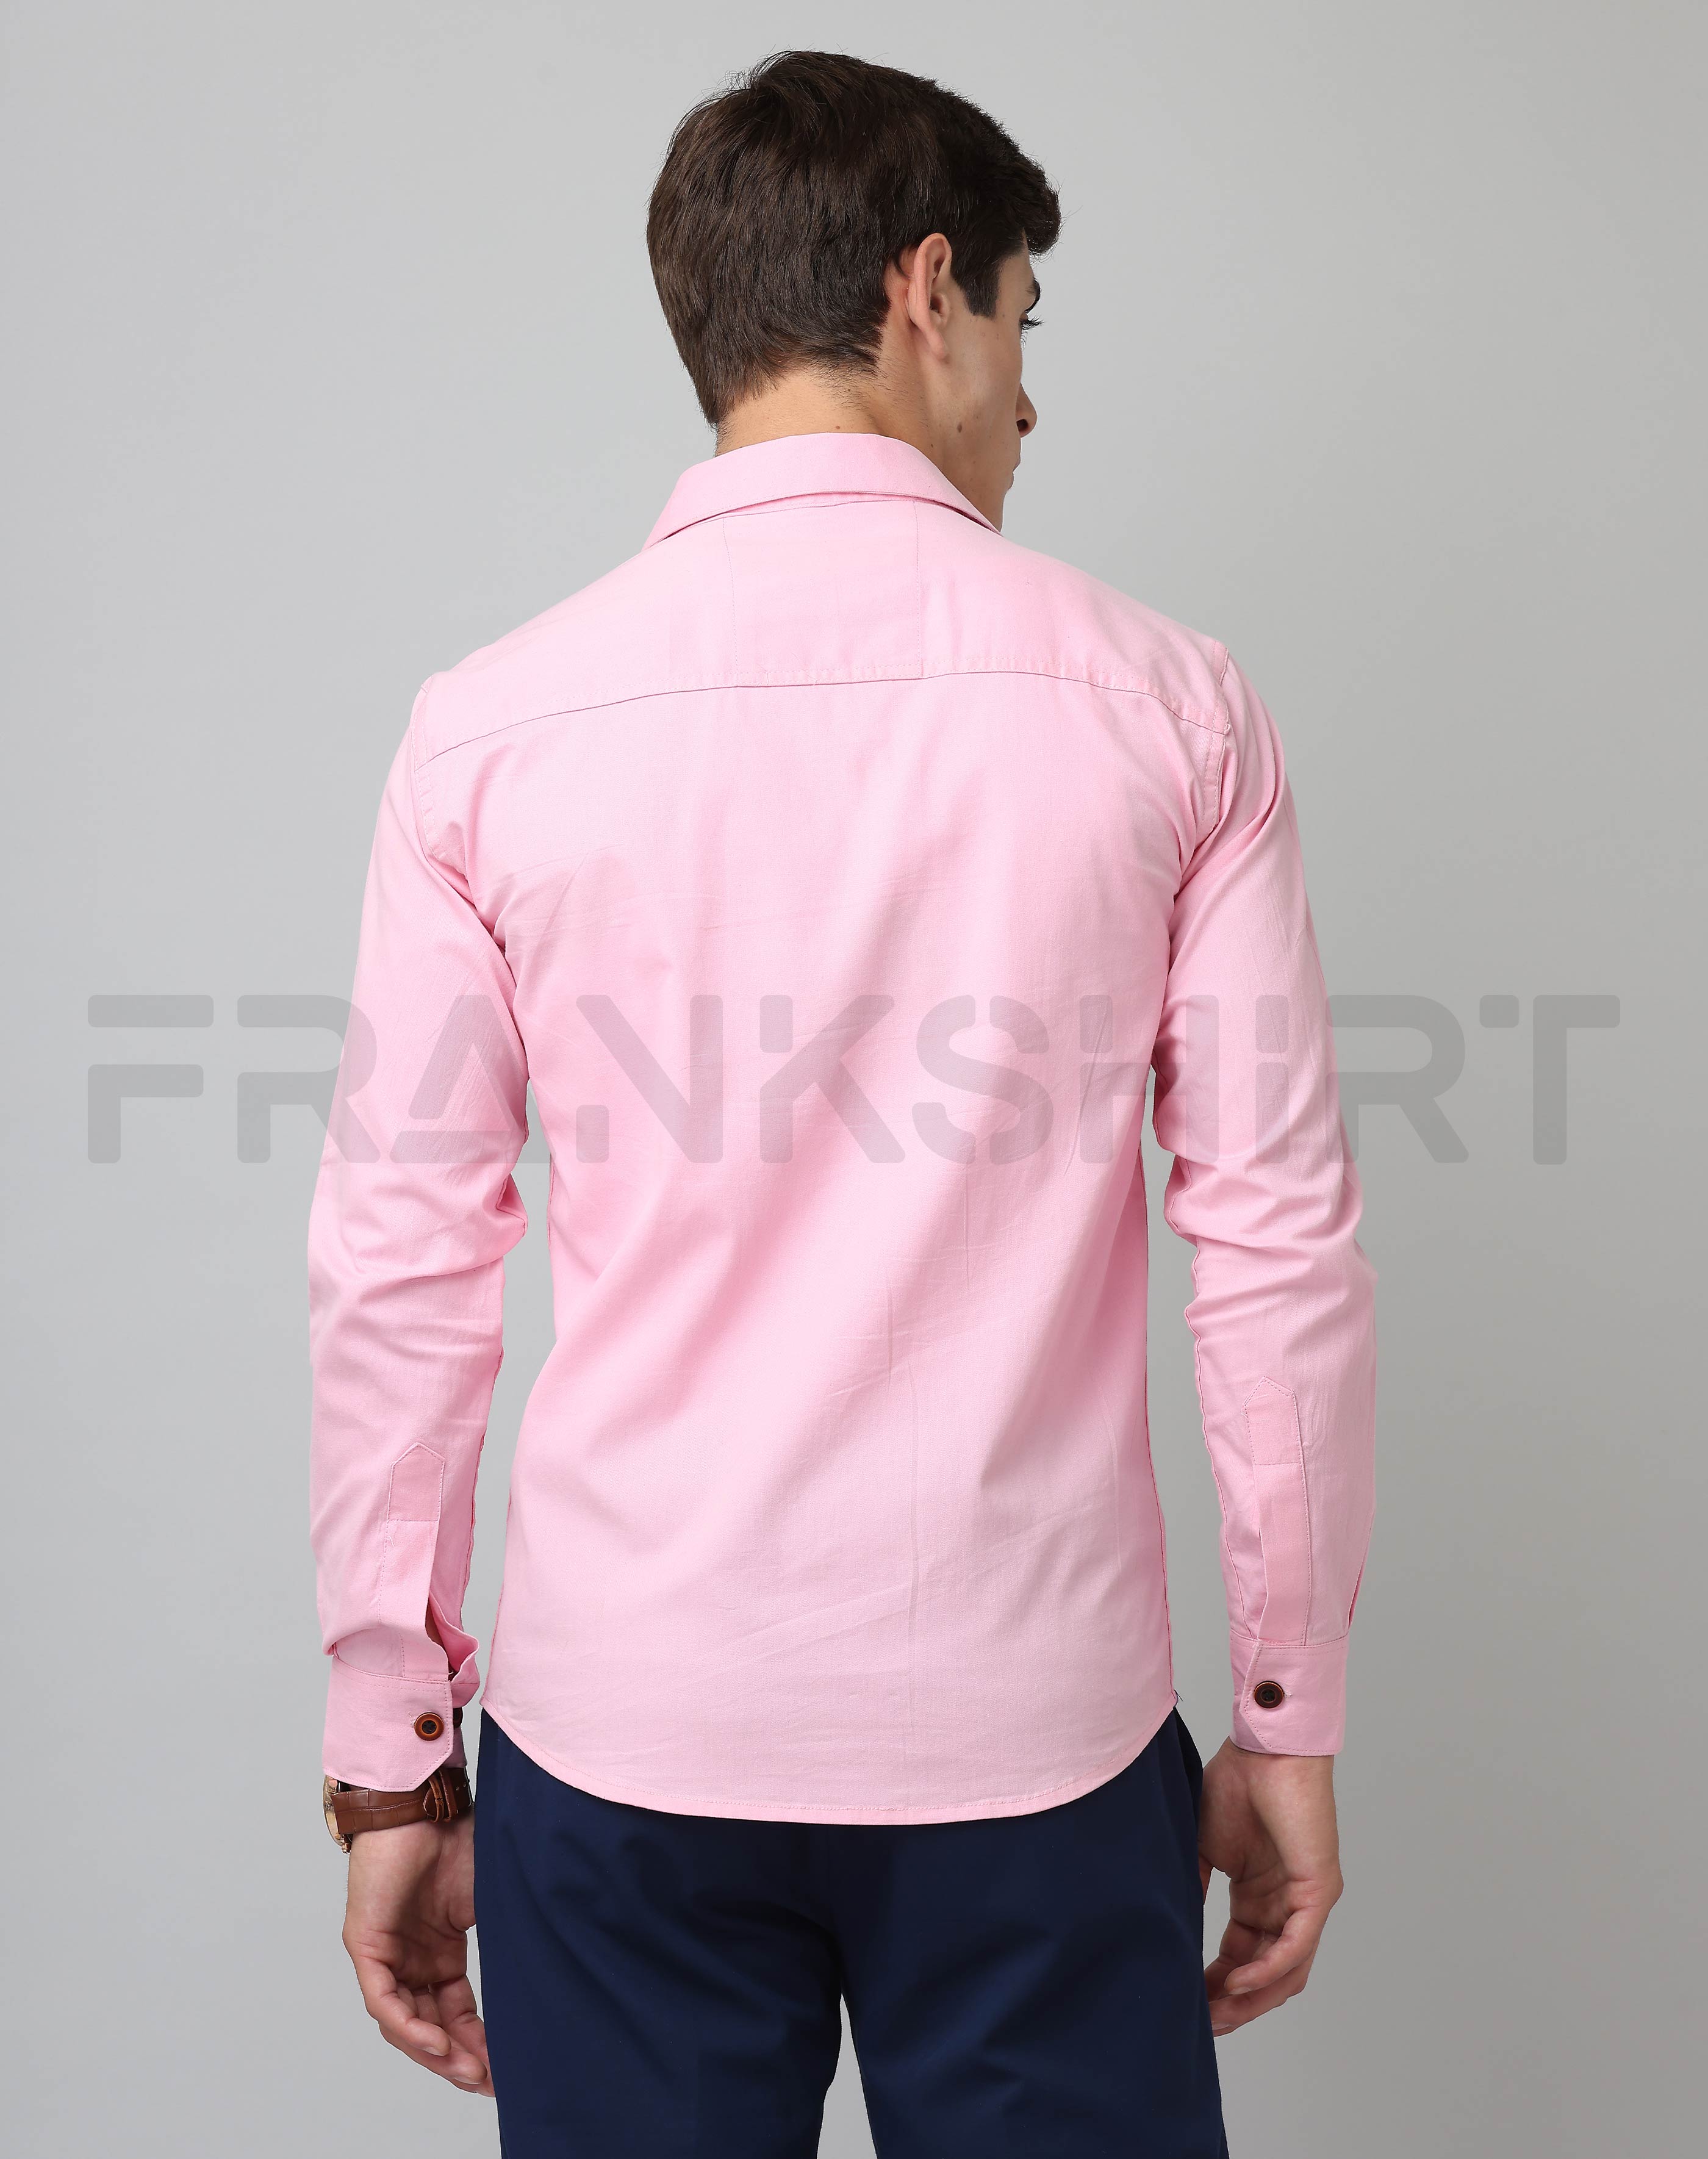 Frankshirt Double Pocket Pink Solid Tailored Fit Cotton Casual Shirt for Man